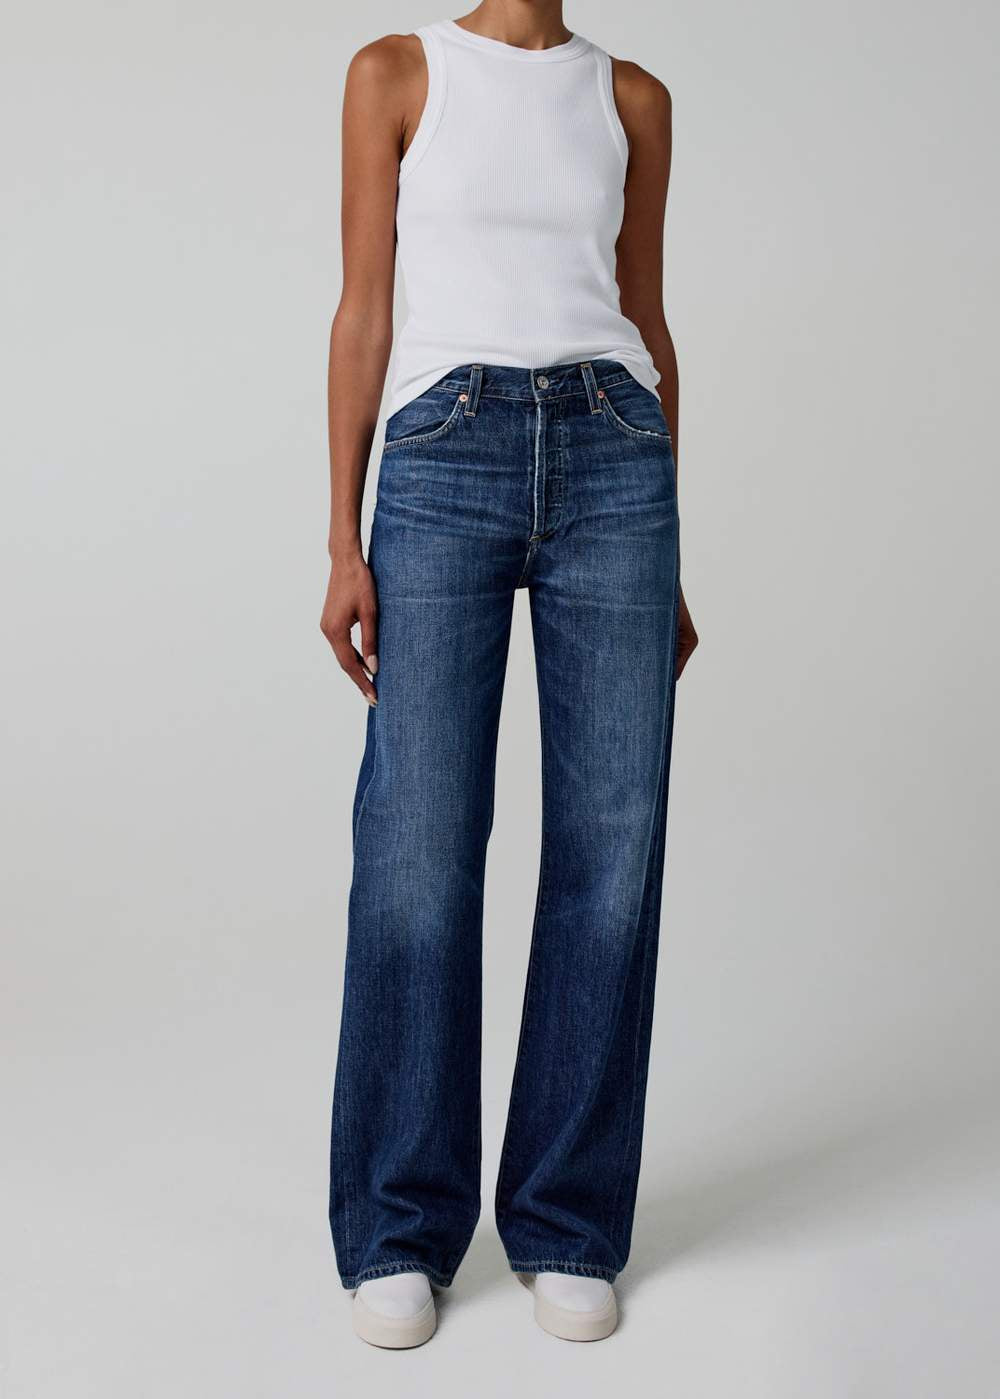 Citizens of Humanity Annina Trouser Jean in Blue Rose